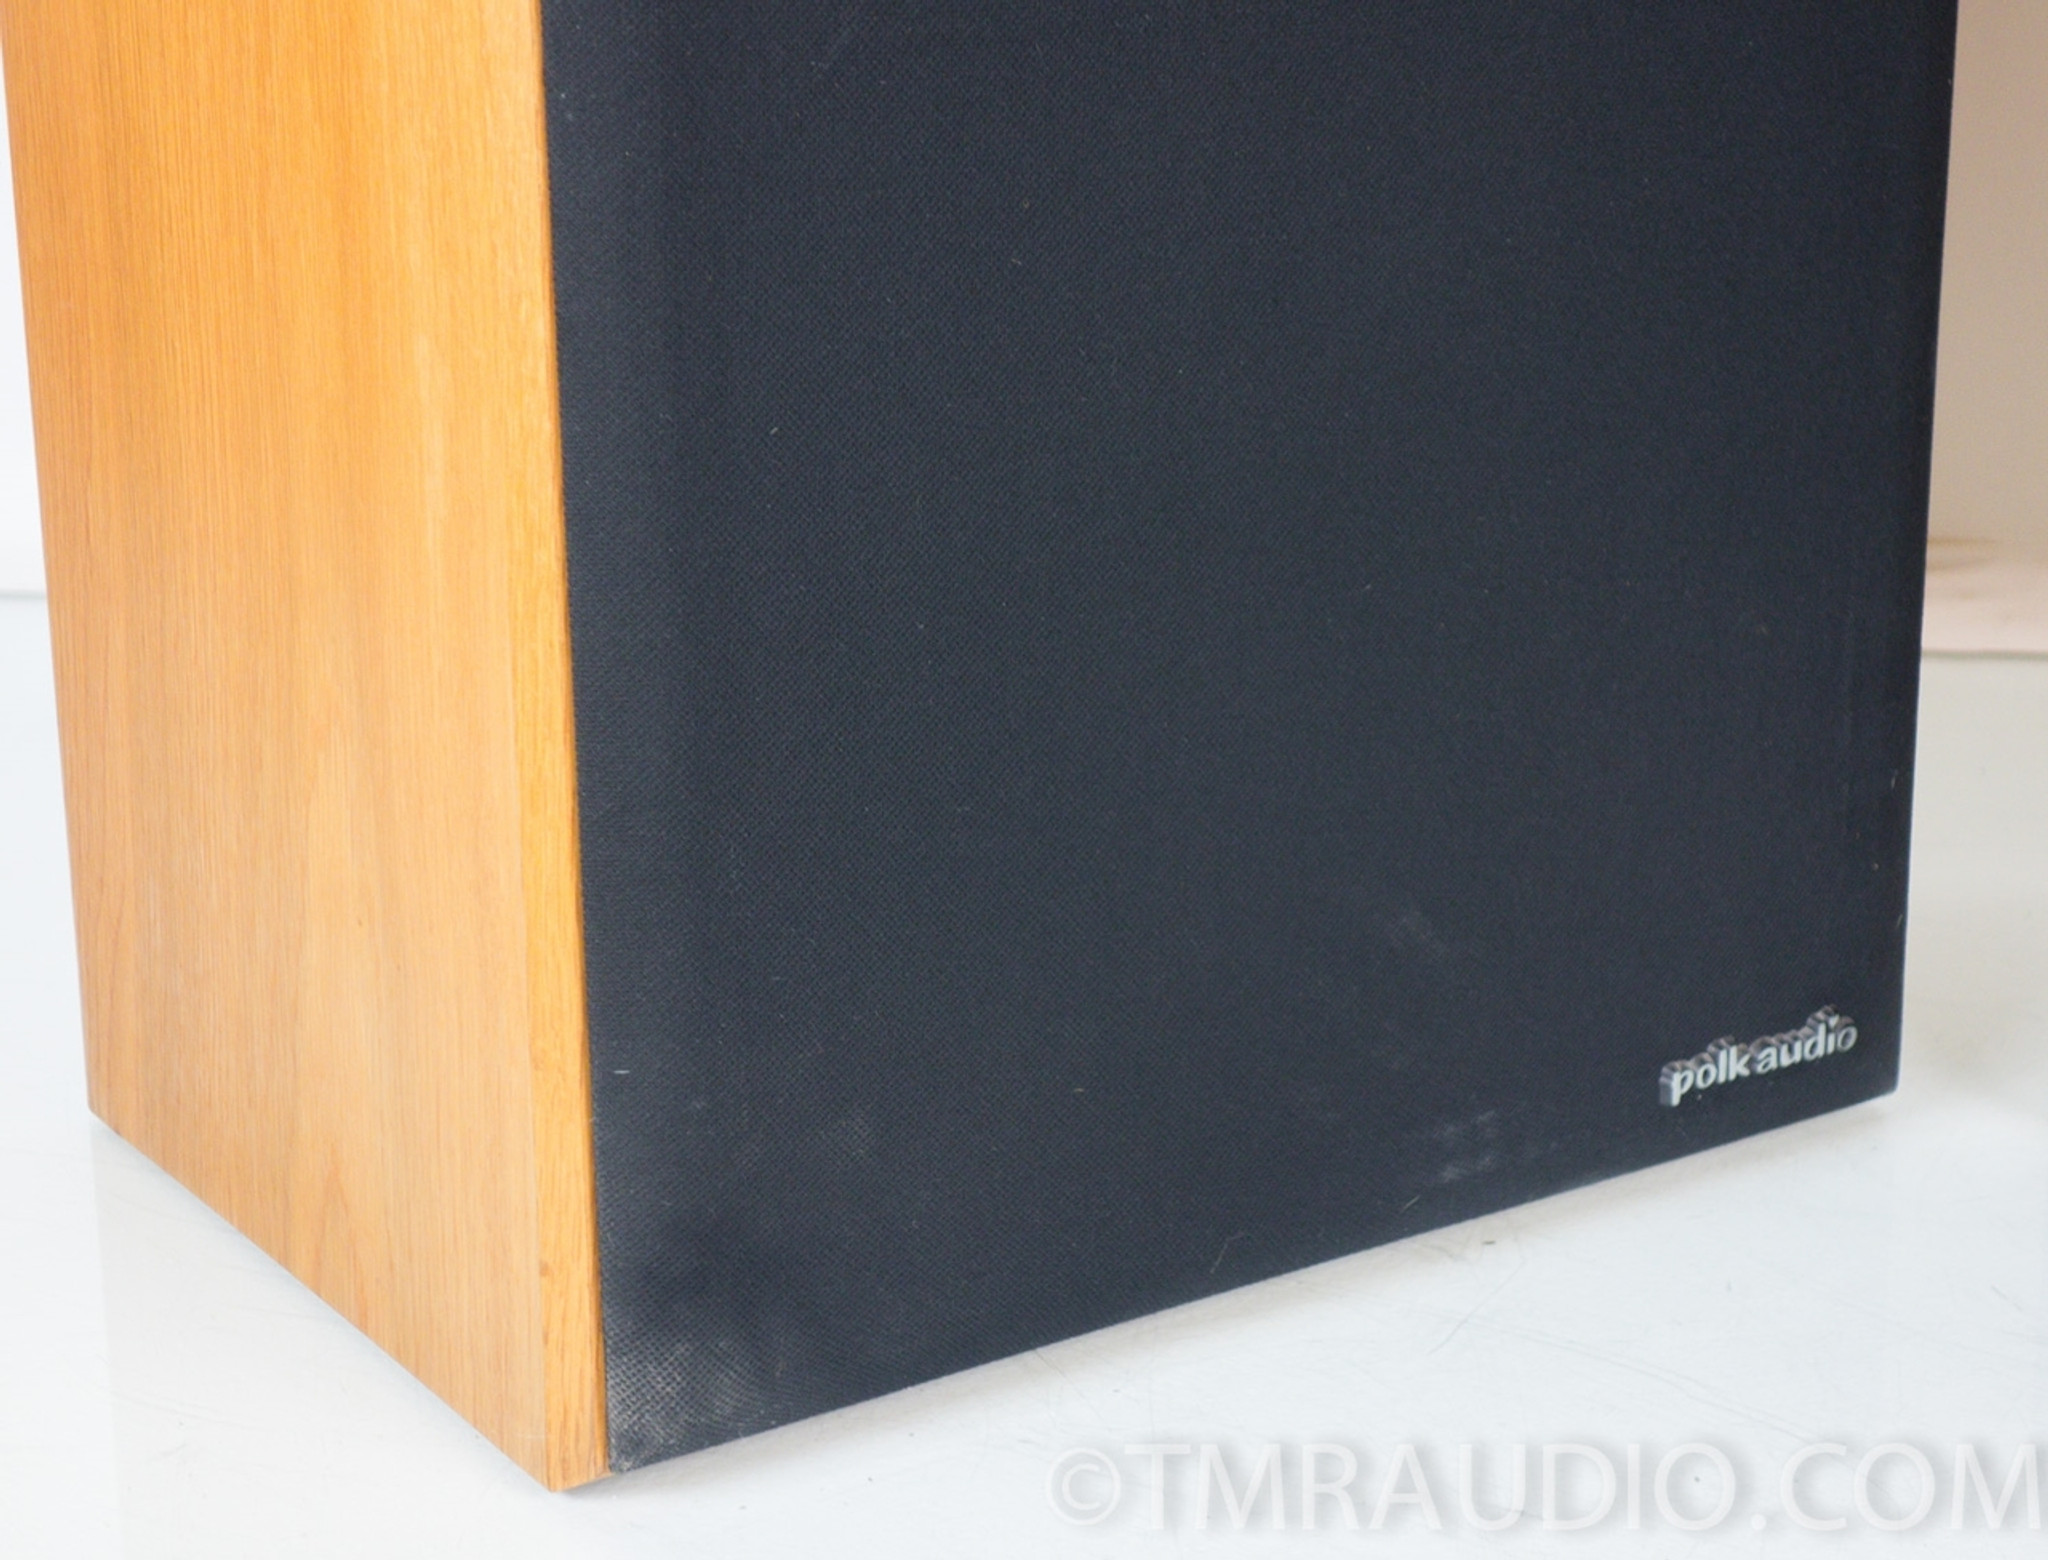 Polk Audio Monitor 10 Speakers; Excellent Working Pair - The Music Room